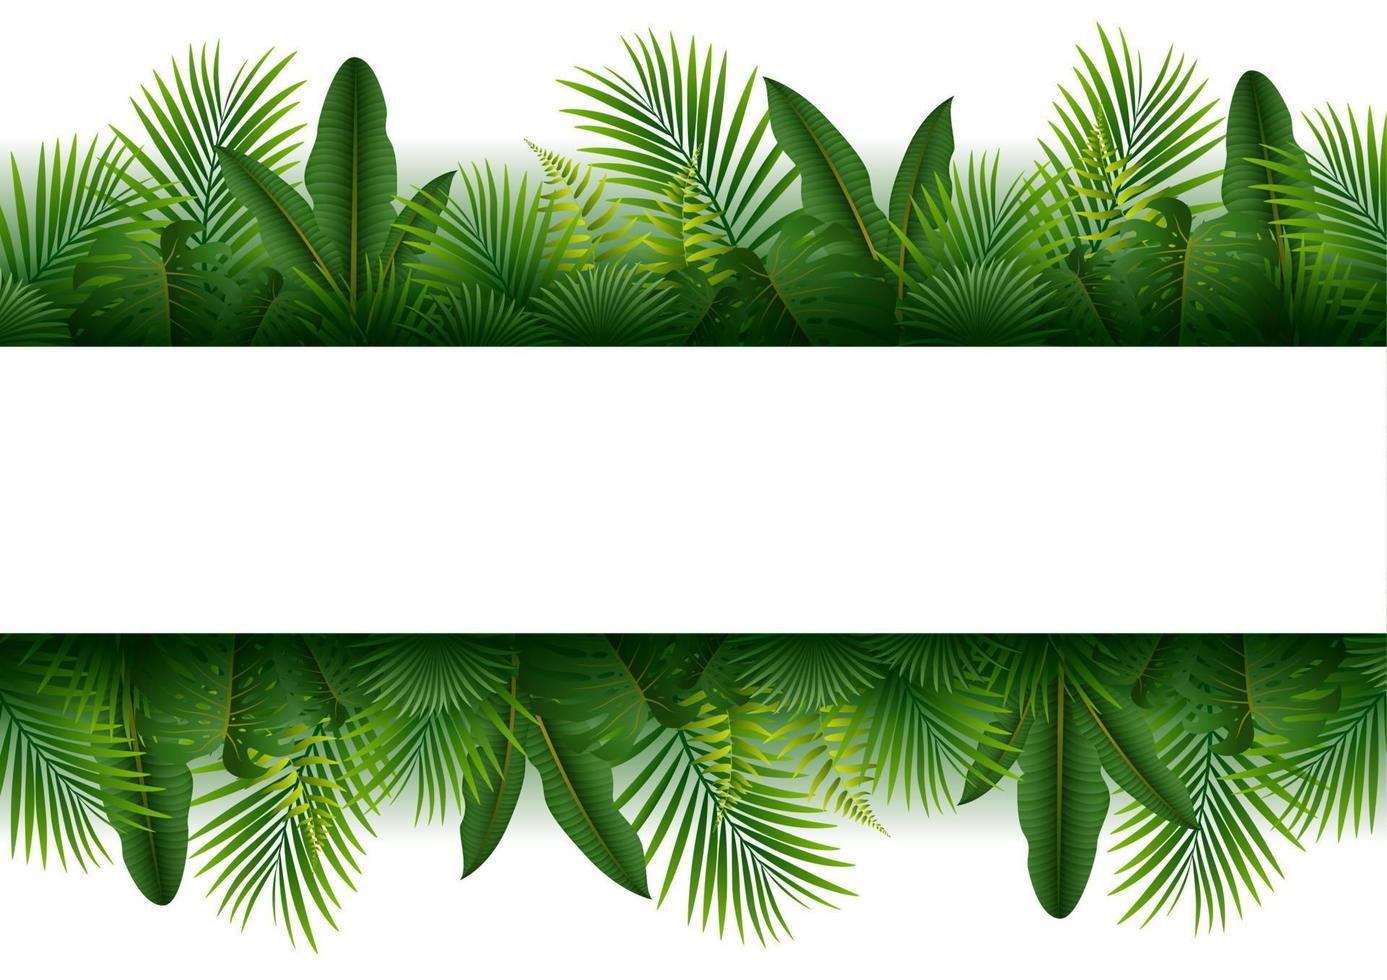 Blank sign with Tropical forest background vector